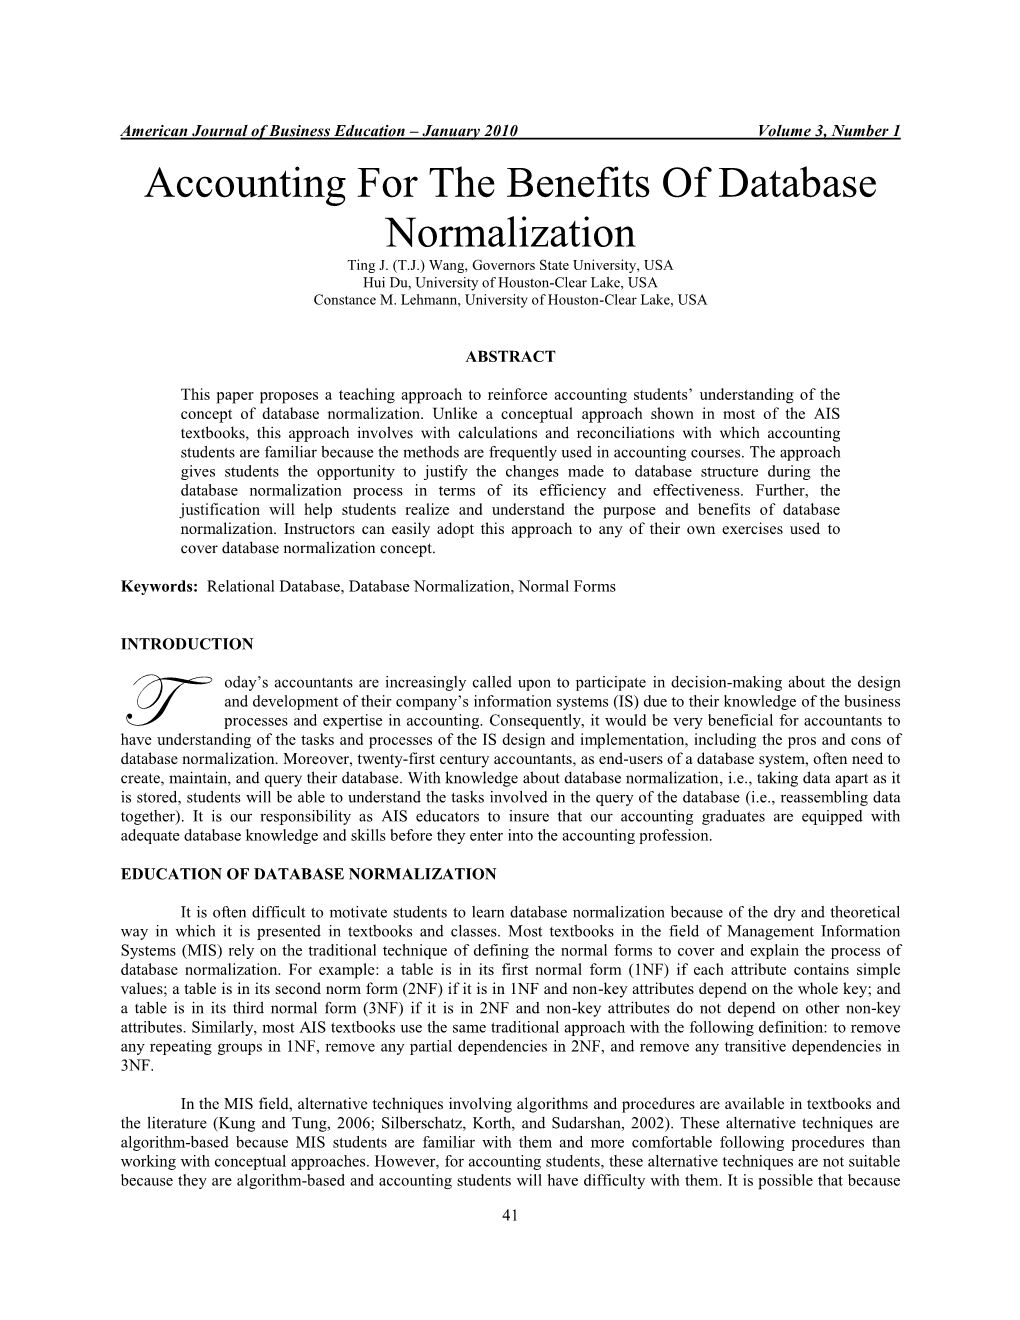 Accounting for the Benefits of Database Normalization Ting J